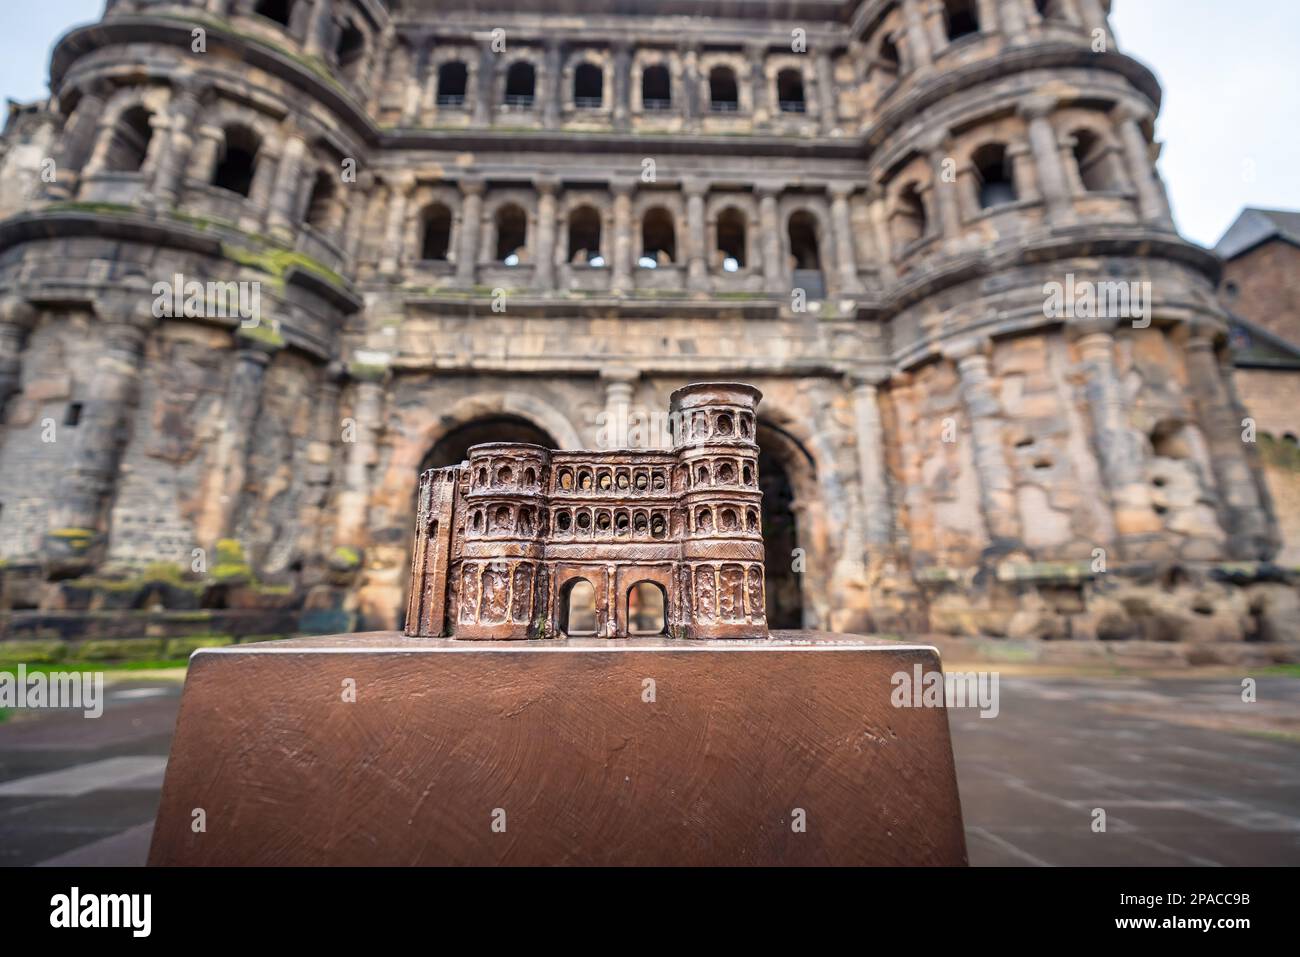 Miniature model of Porta Nigra in front of the real one - Trier, Germany Stock Photo